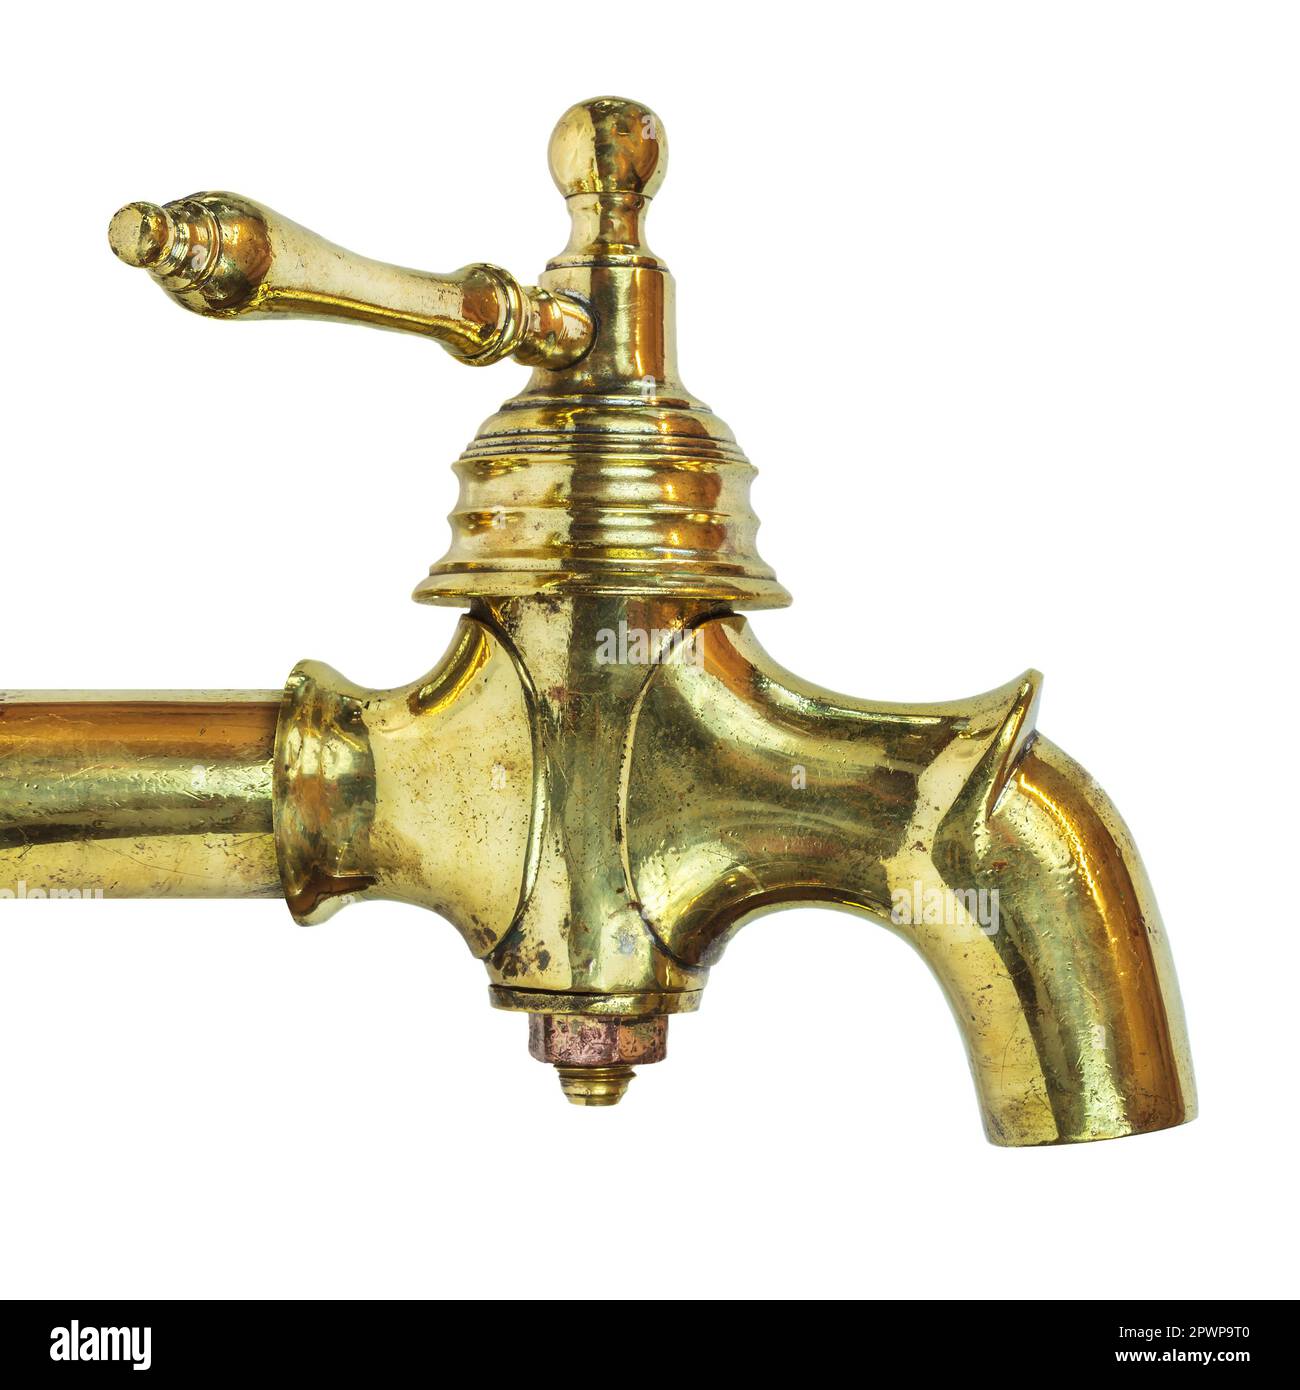 Side view of an ancient brass ornamental water tap isolated on a white background Stock Photo